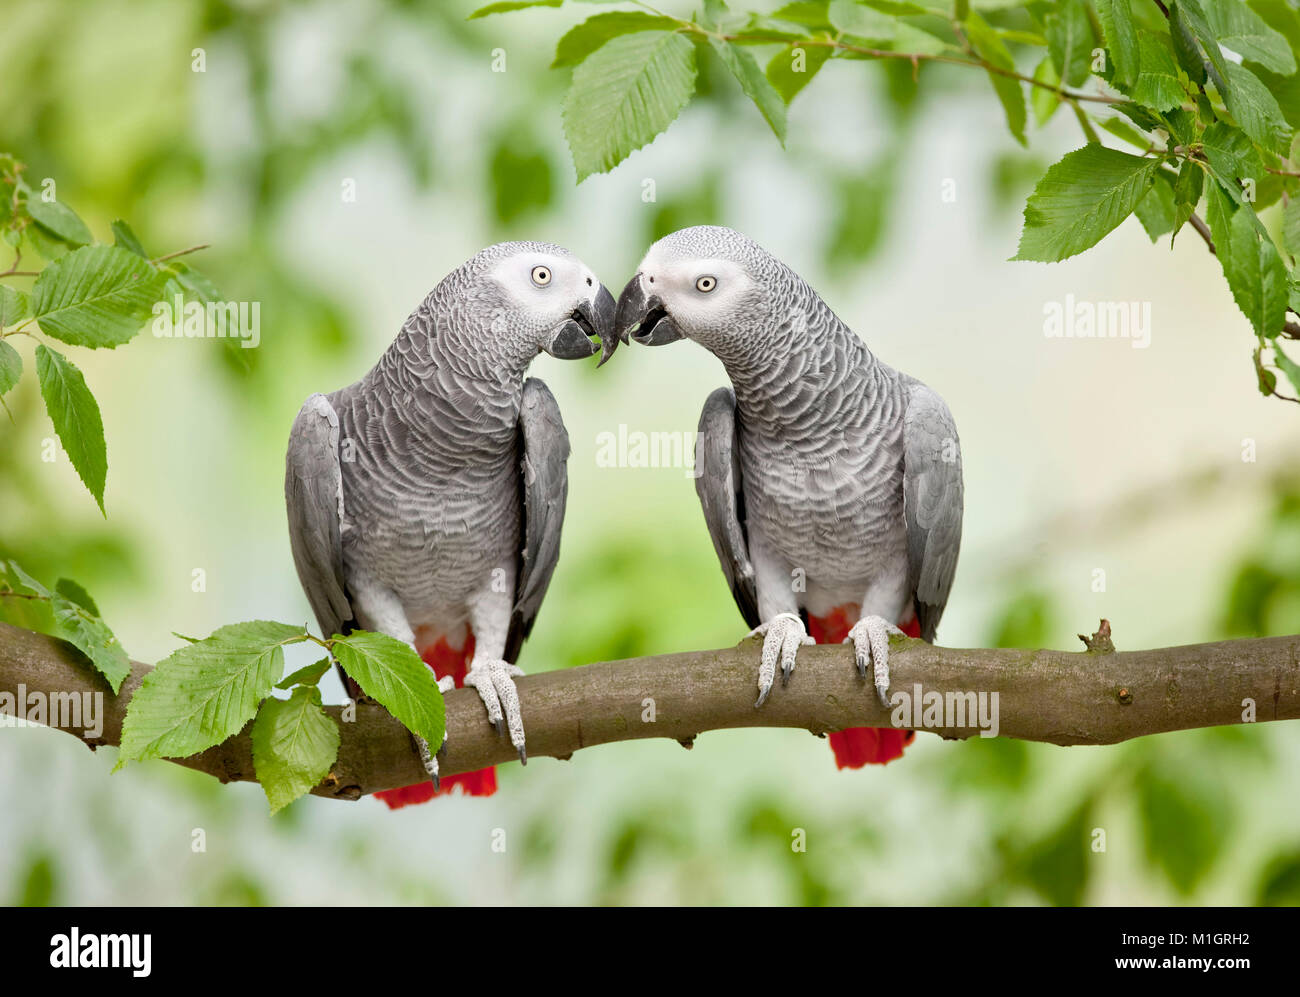 African Grey Parrot (Psittacus erithacus). Pair of adult perched on a branch, billing. Germany Stock Photo